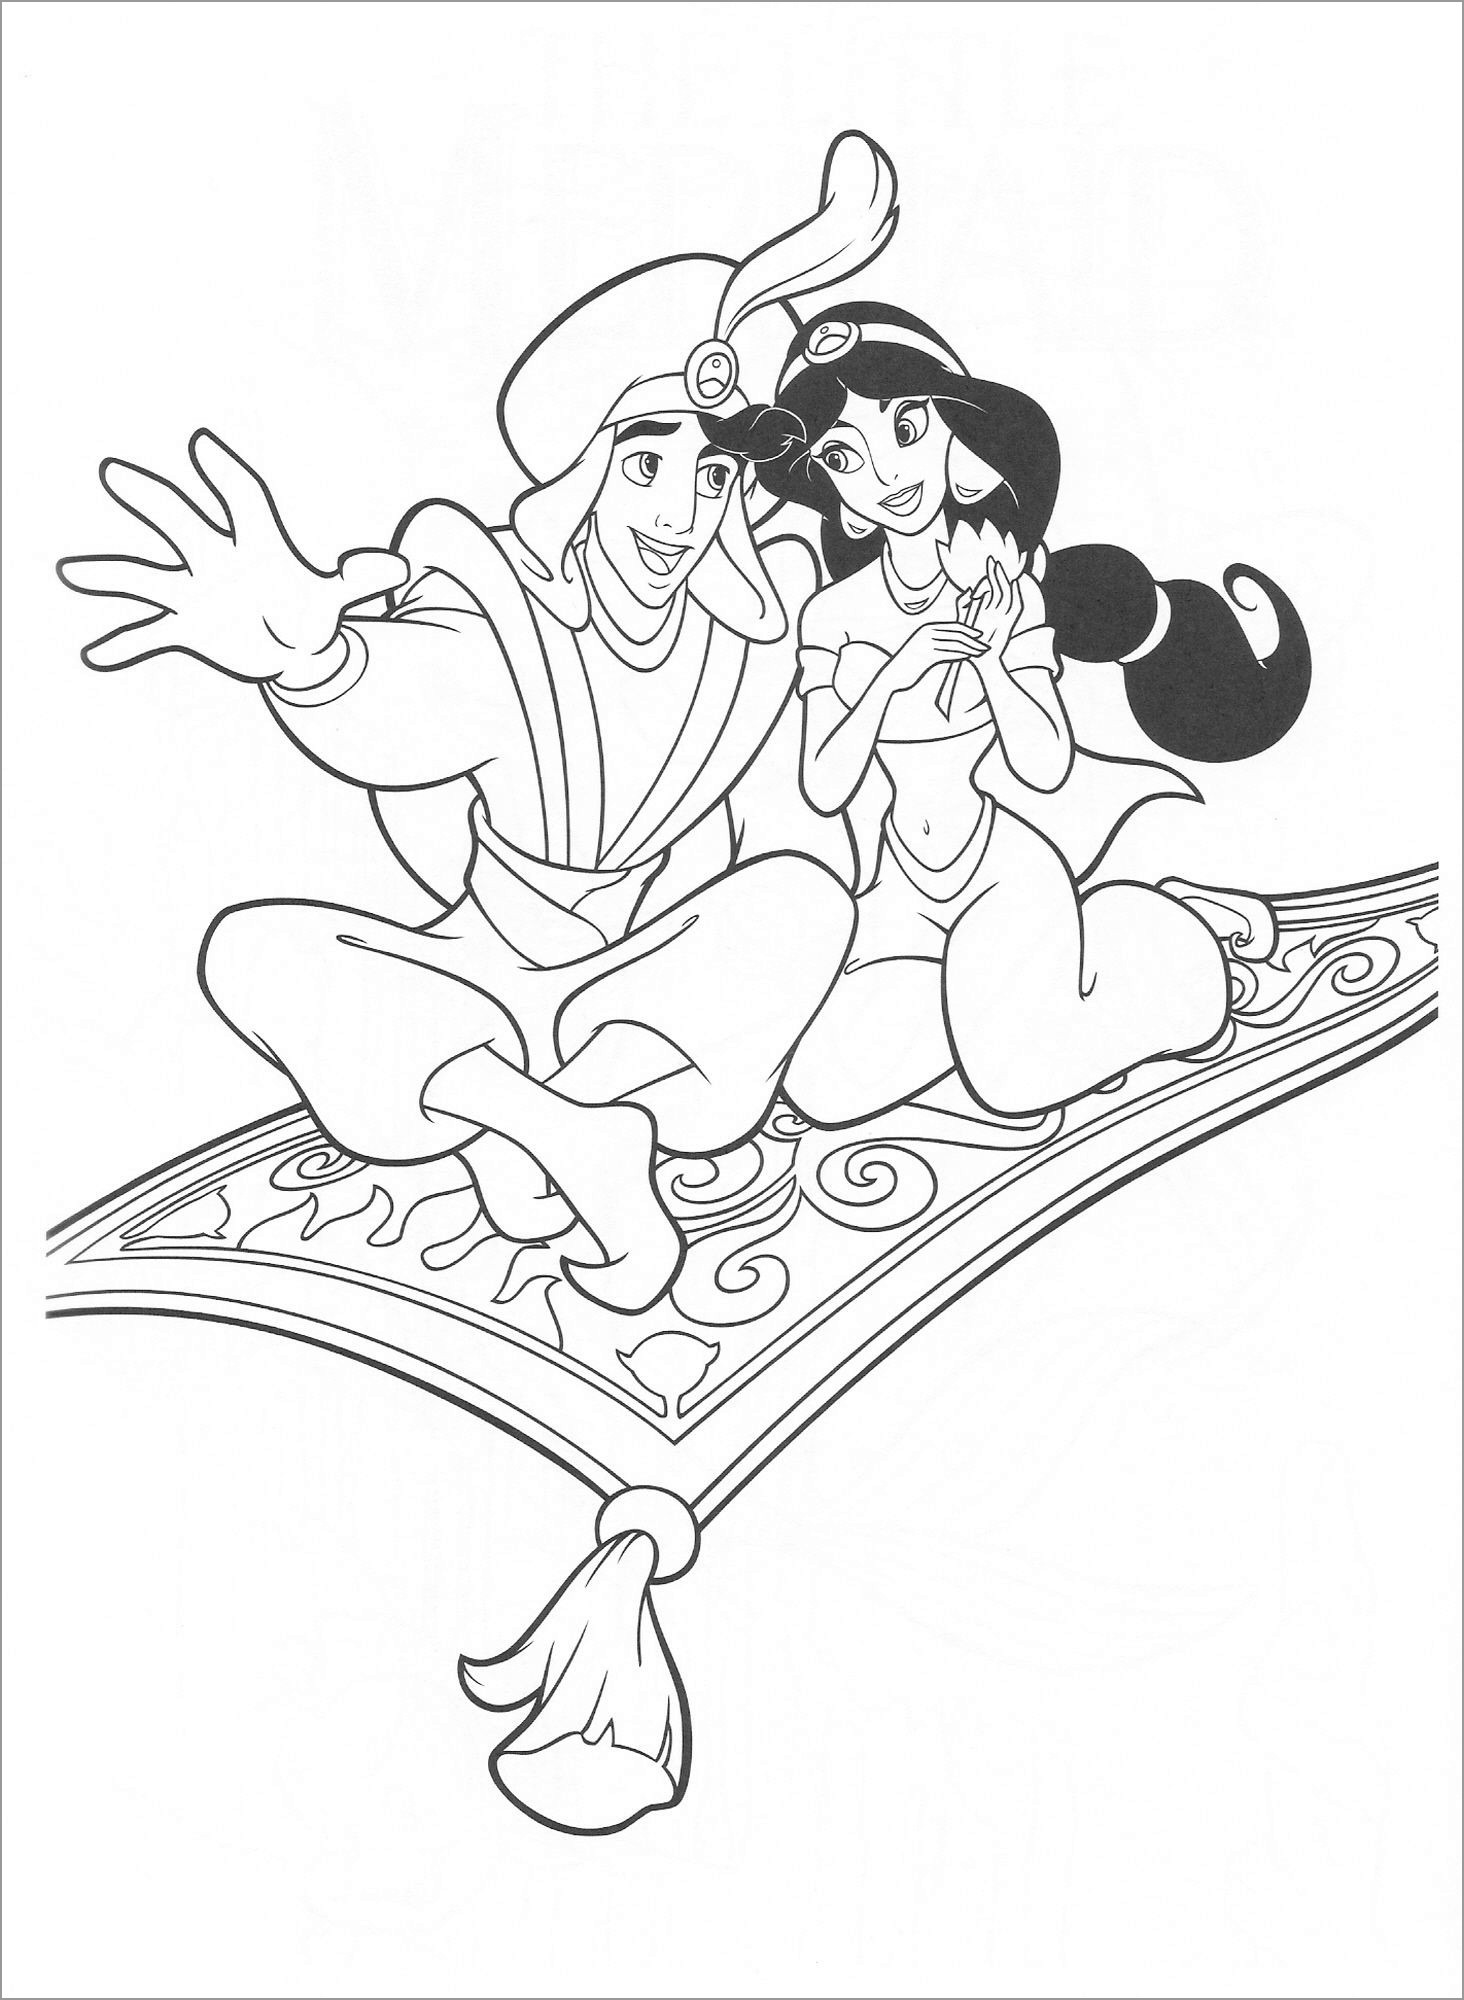 Aladdin and Jasmine Flying with Magic Carpet Coloring Page to ...